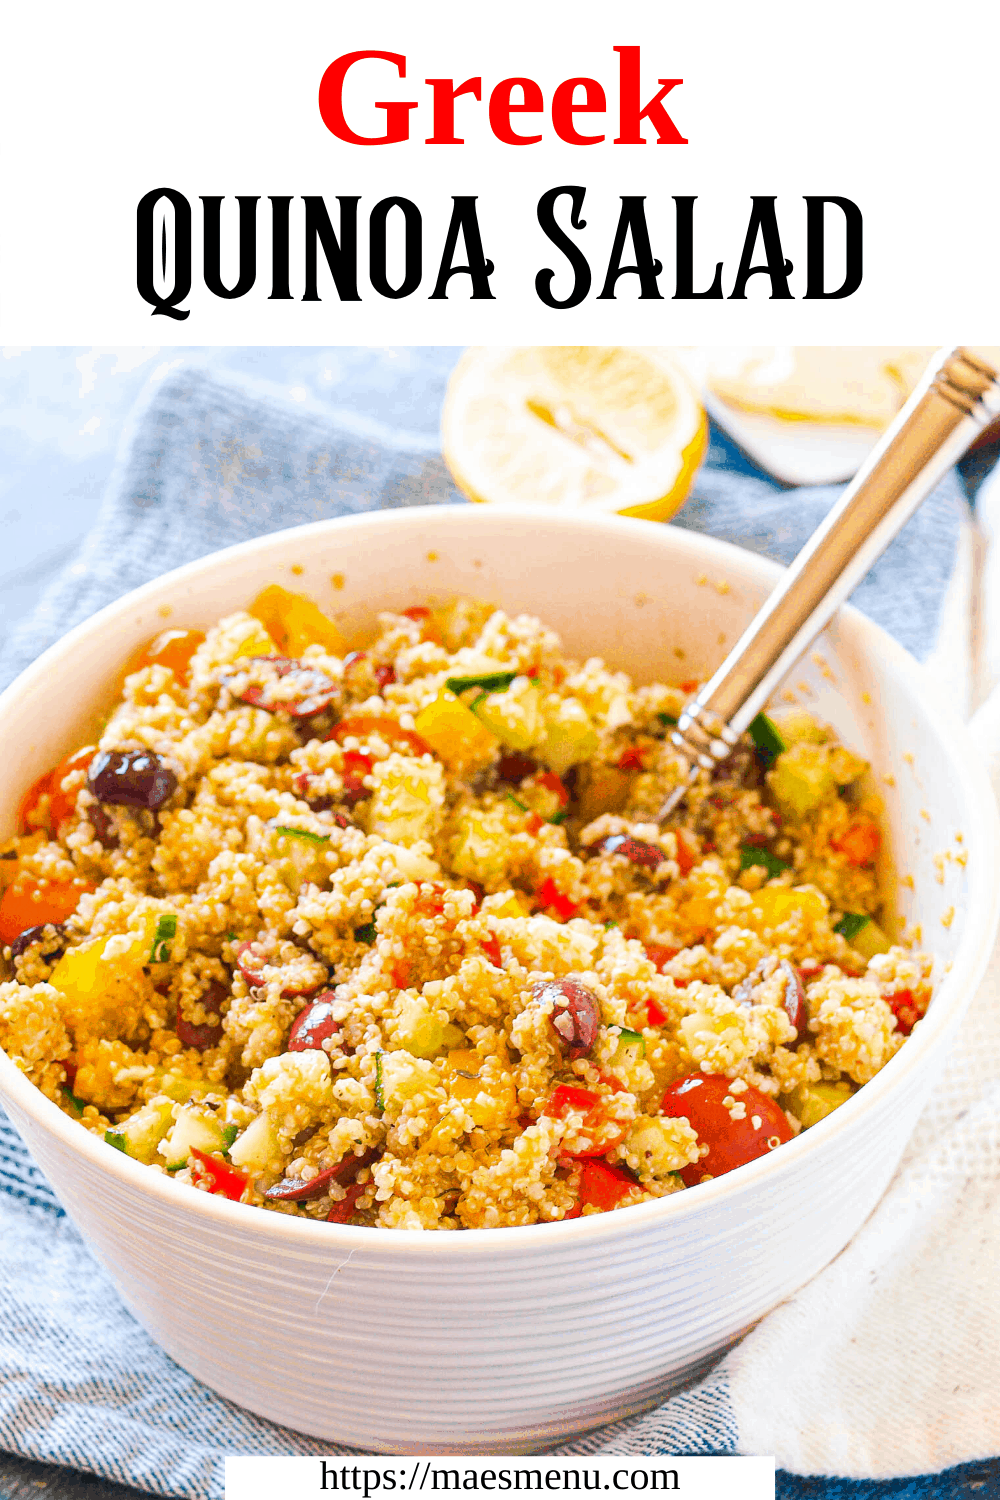 A pinterst pin for Greek Quinoa Salad. A large bowl of the salad sits in the center of the bowl with a large stainless steel serving spoon in it. 